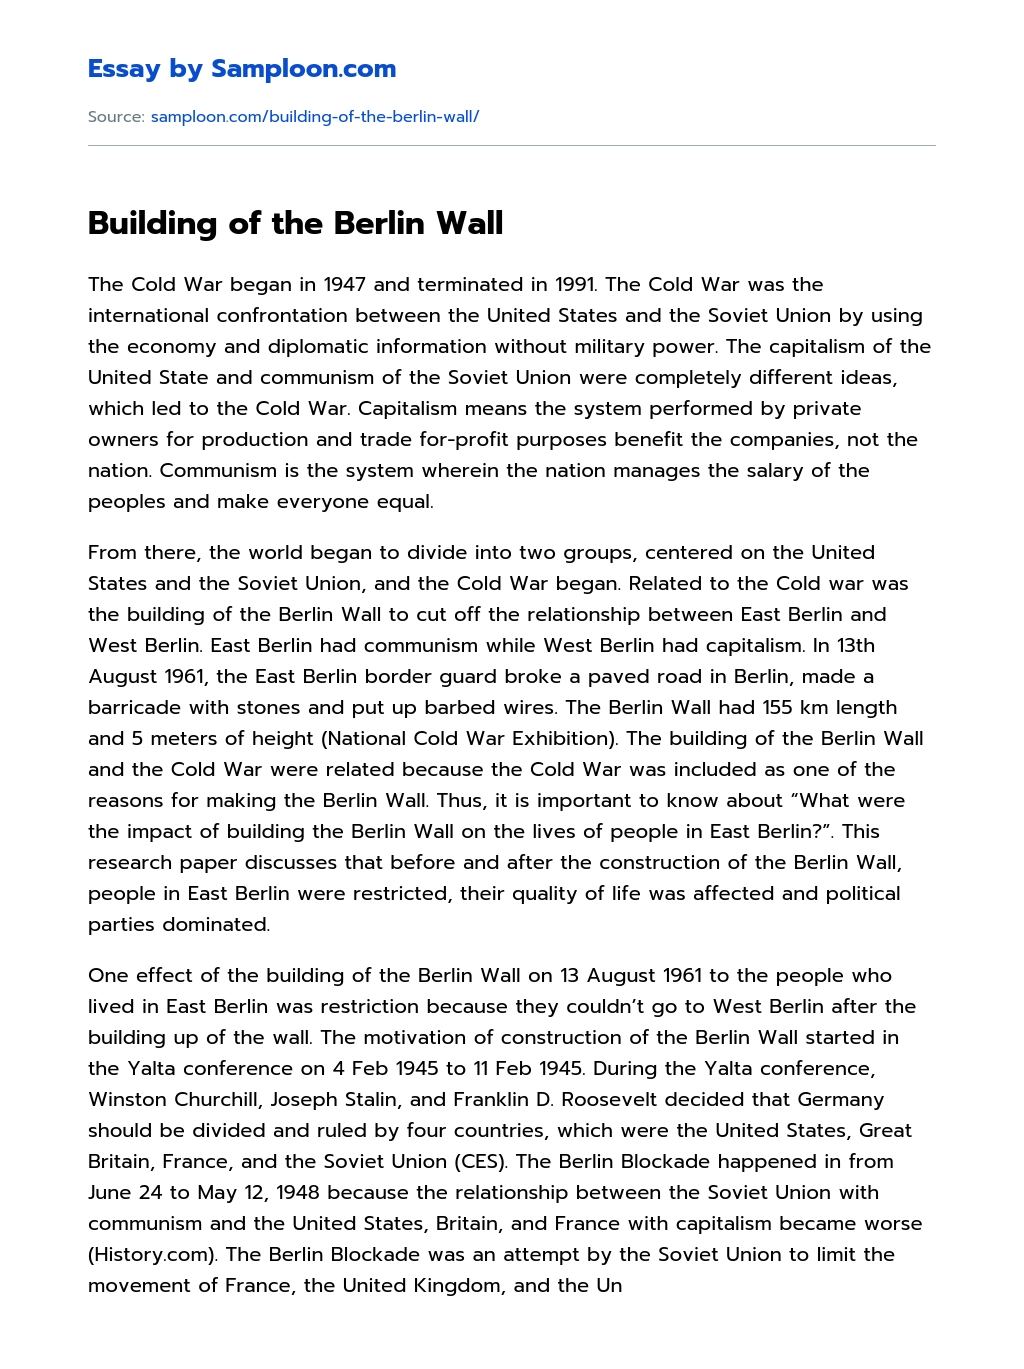 Building of the Berlin Wall essay